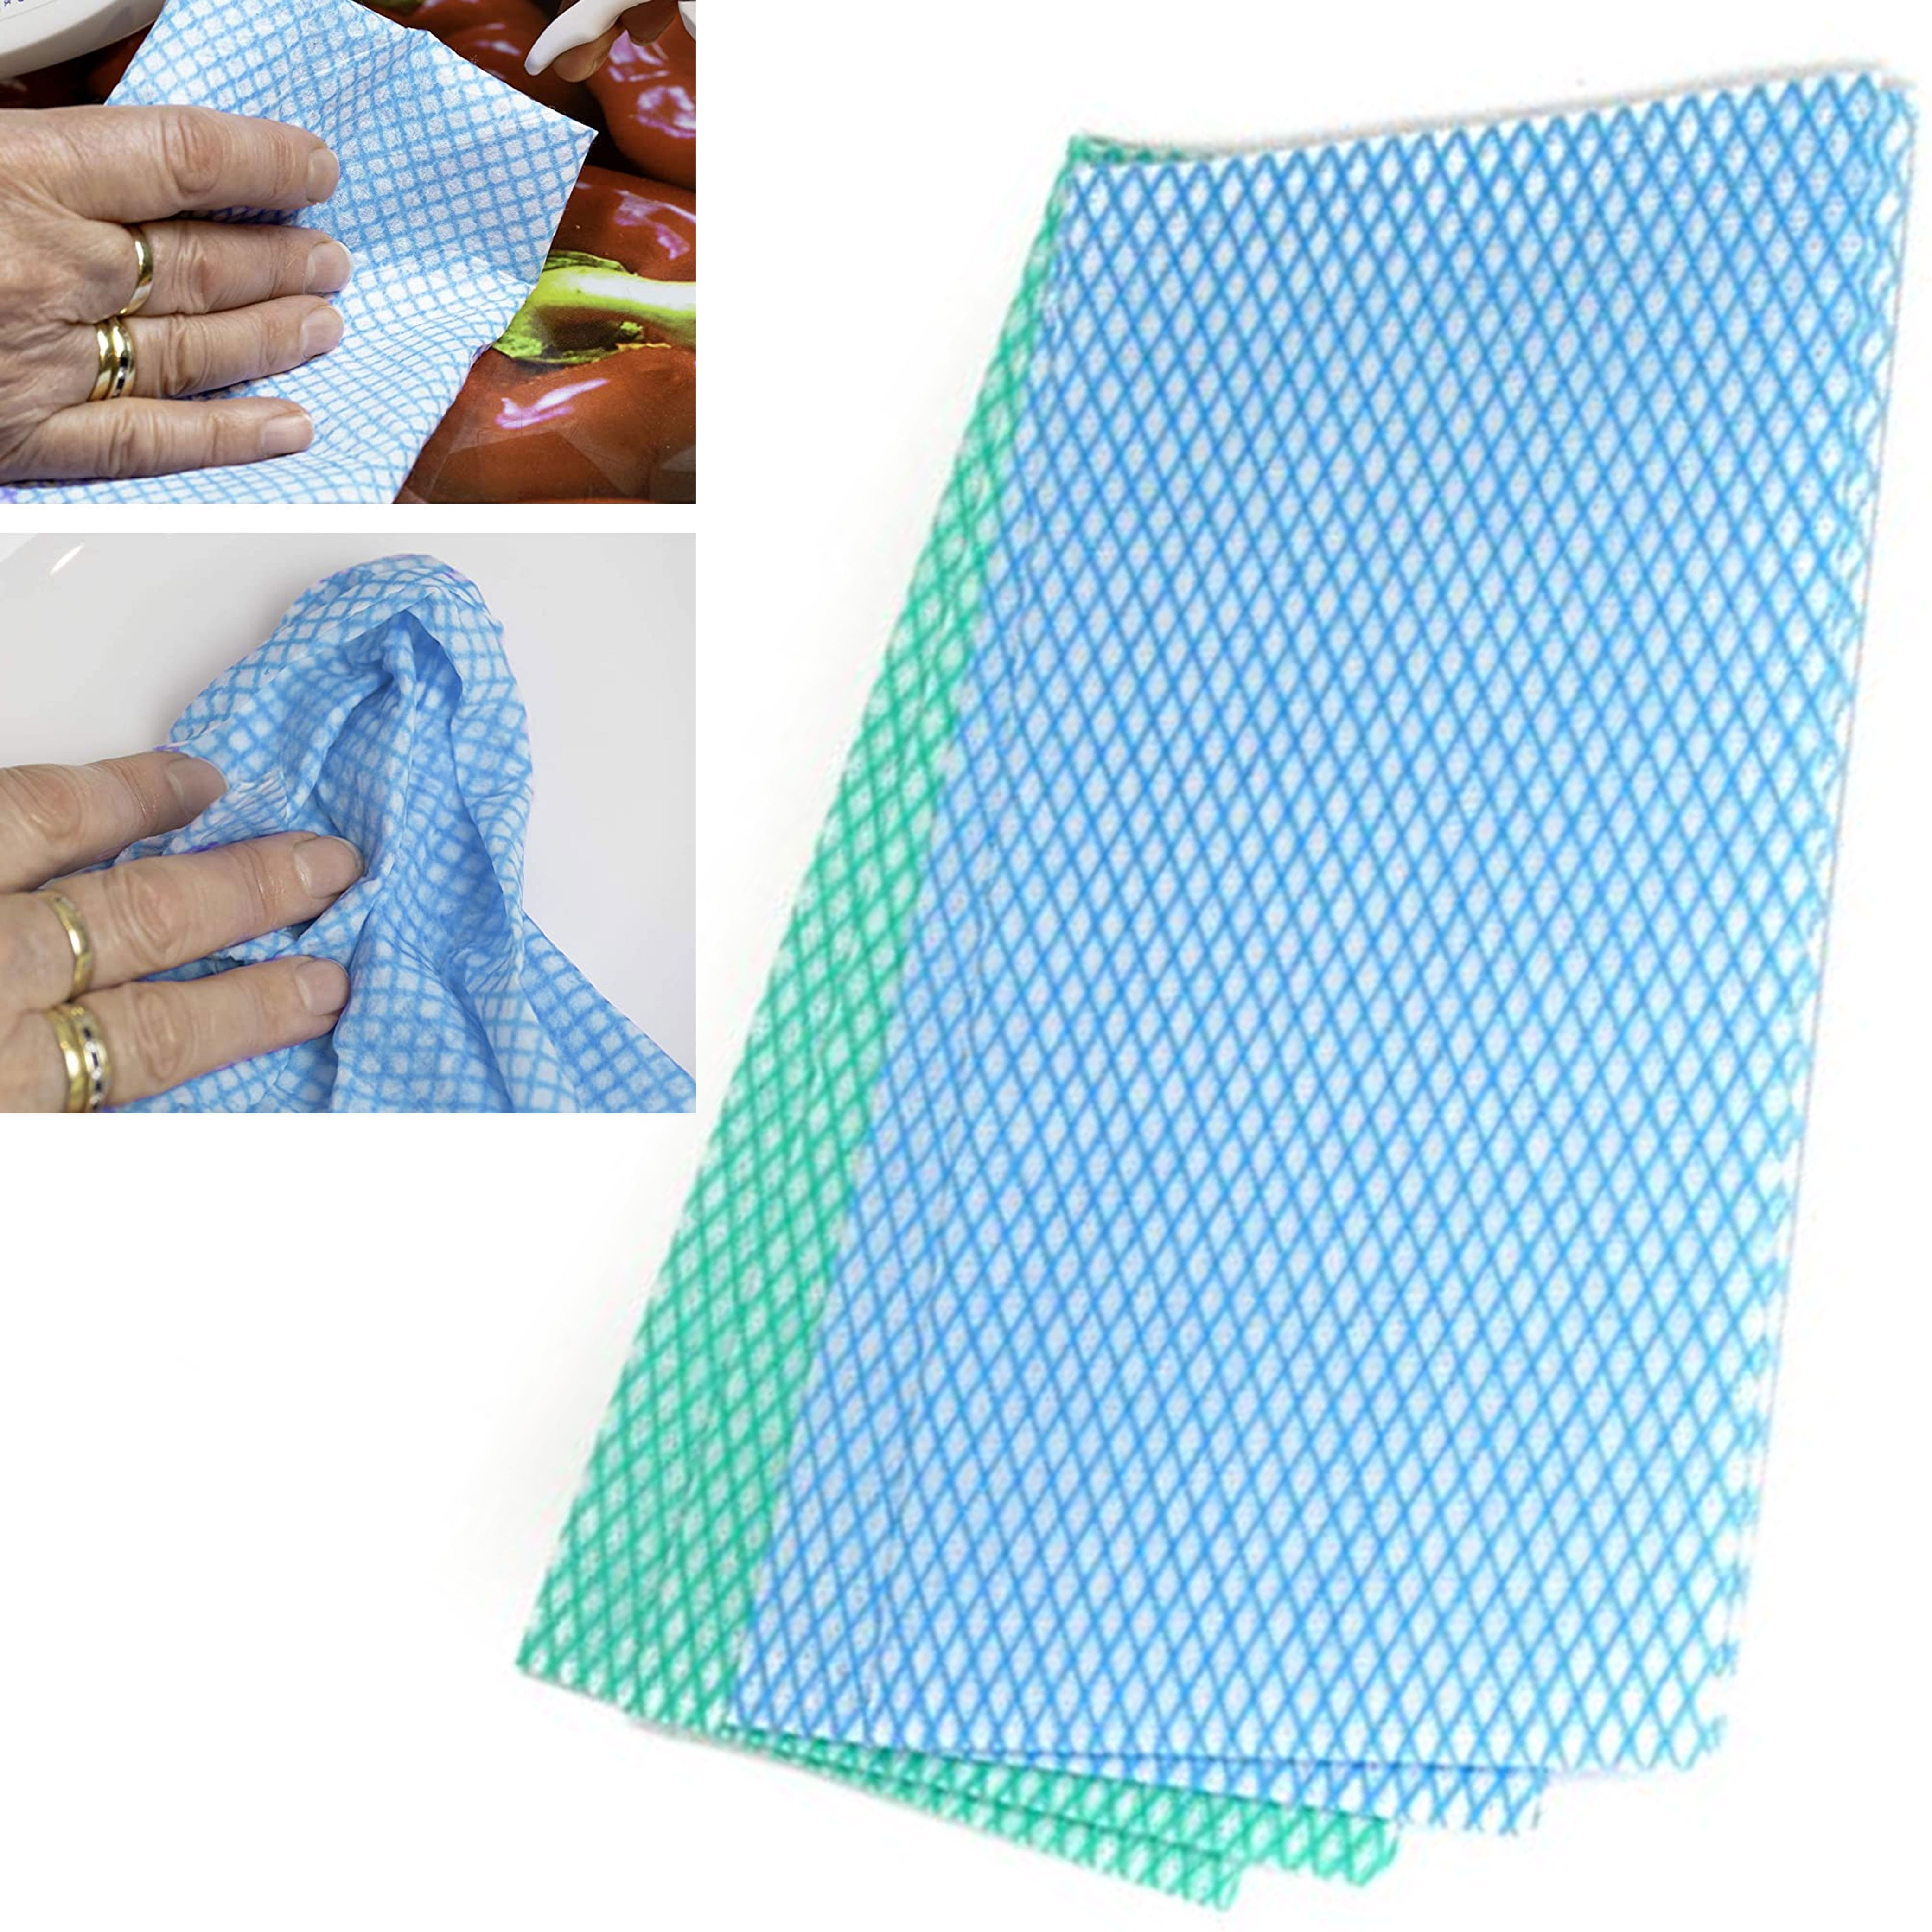 3pcs Random Color Dish Cloths for Towels and Microfiber Dishcloths Dish Washing Dishes Cleaning Kitchen Dining & Bar Reusable Kitchen Food Network